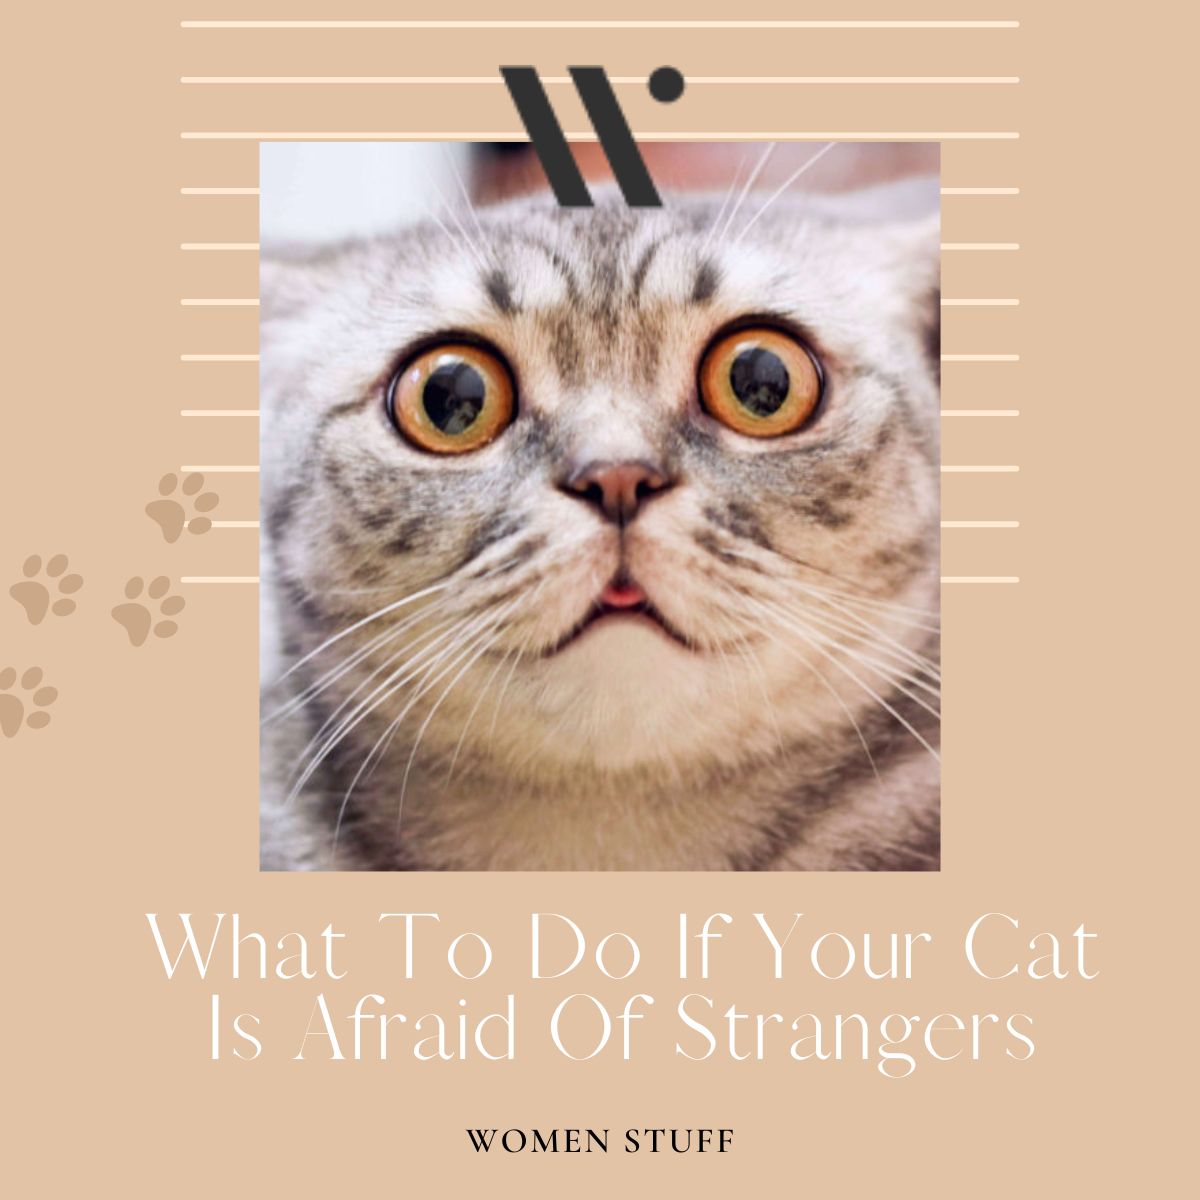 What To Do If Your Cat Is Afraid Of Strangers Banner Image